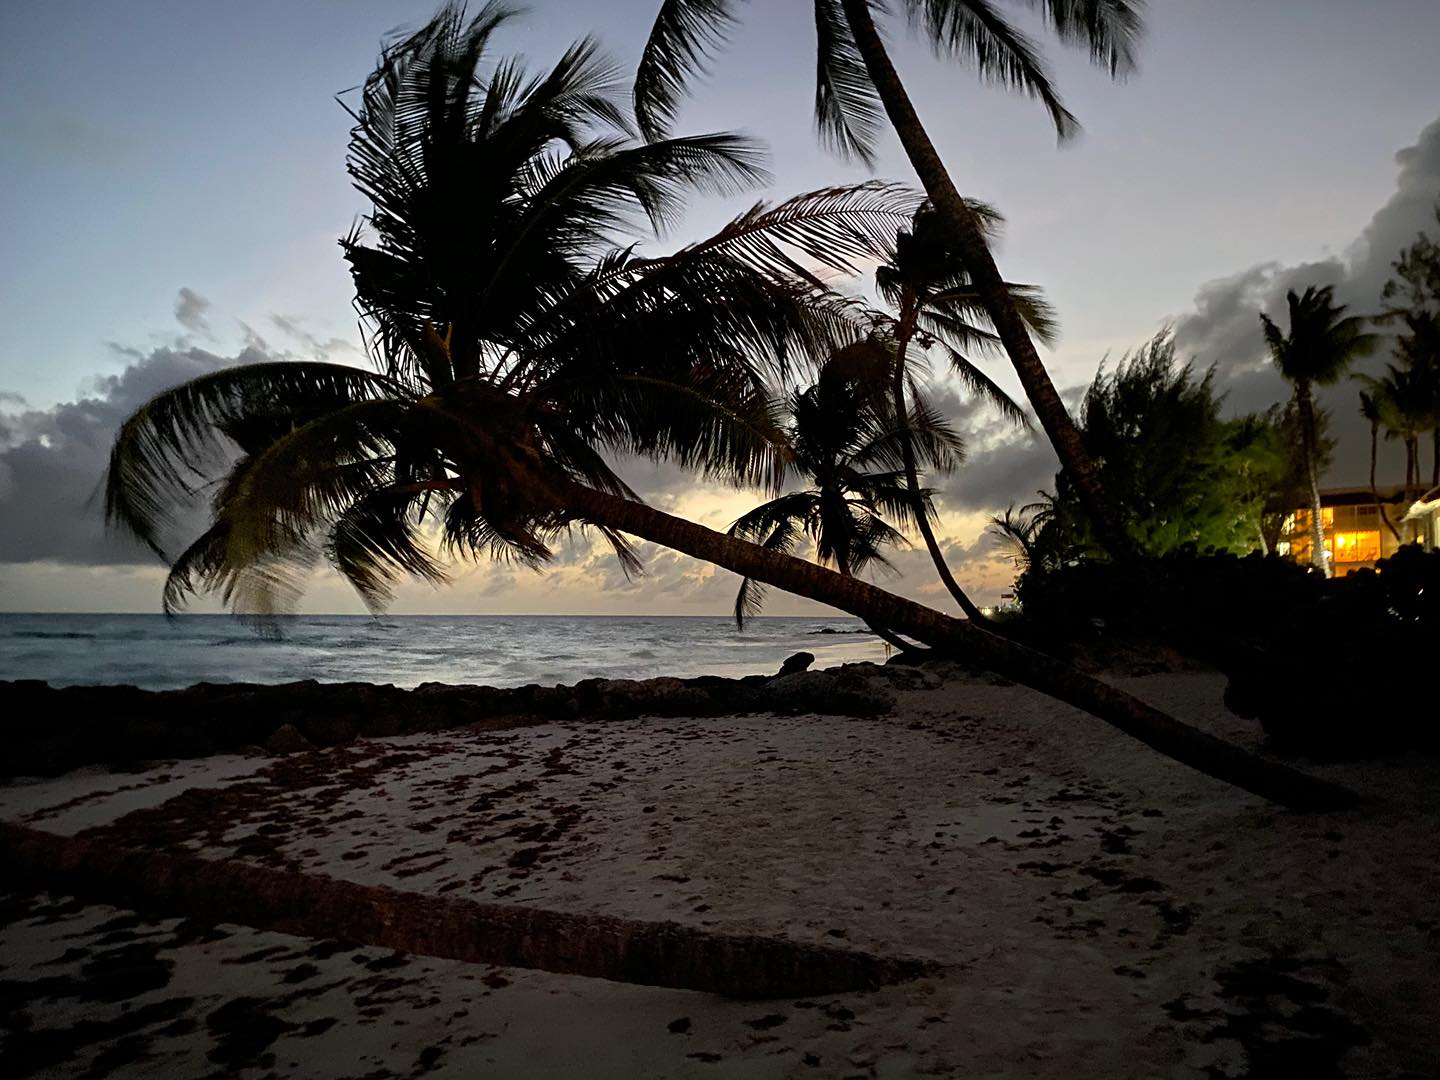 Twilight after a beautiful day on one of Barbados's many wonderful beaches.